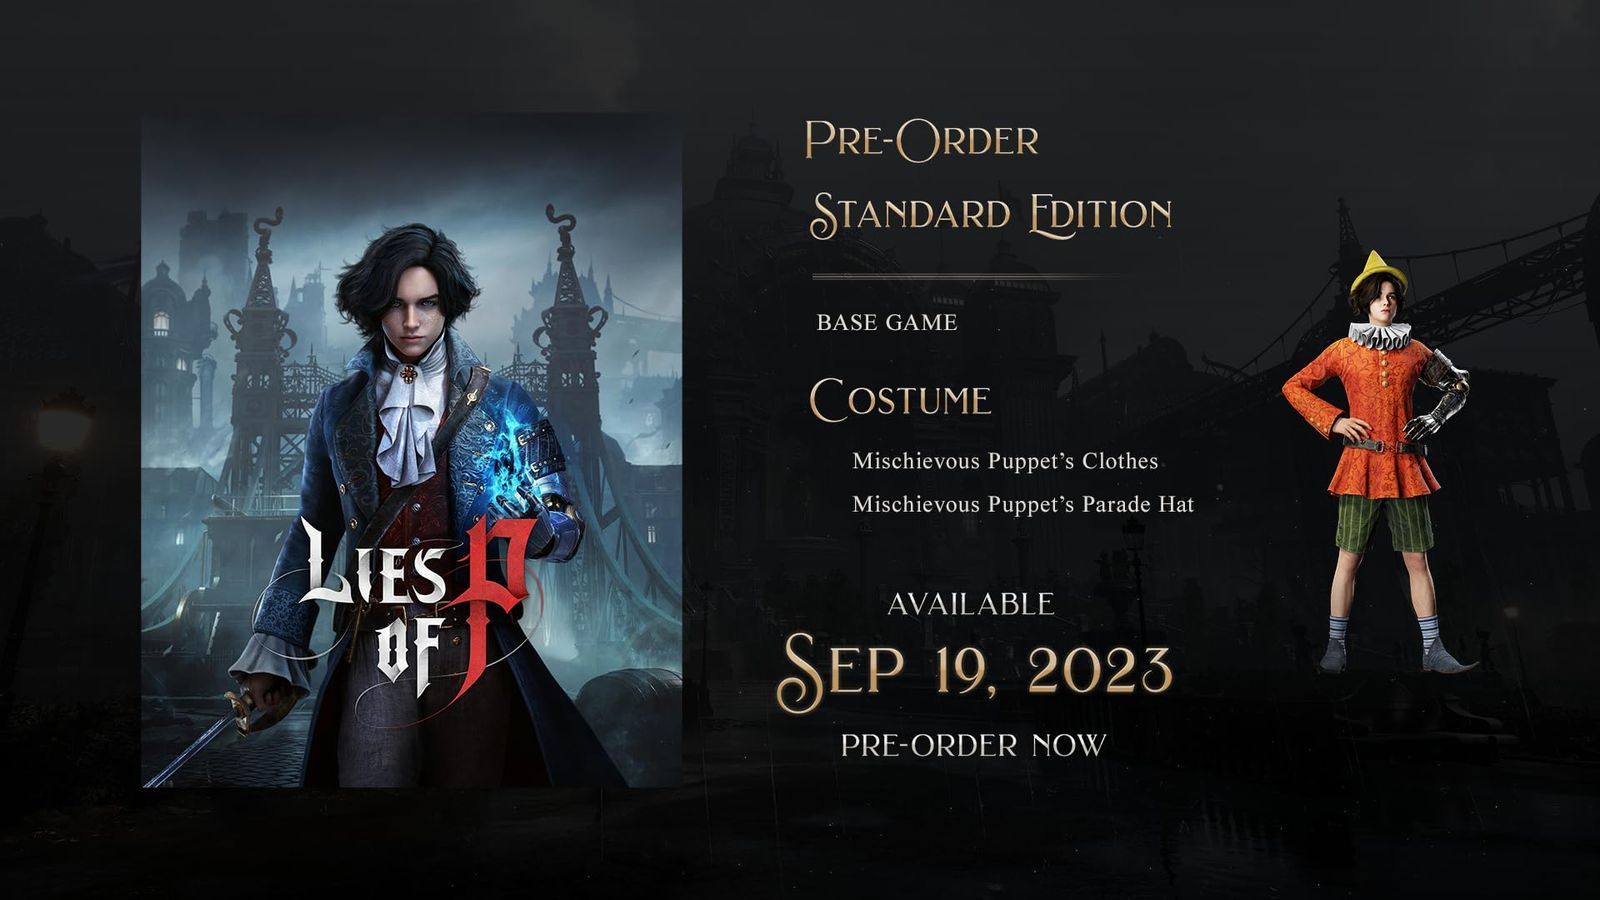 The contents of the standard edition pre-order of Lies of P